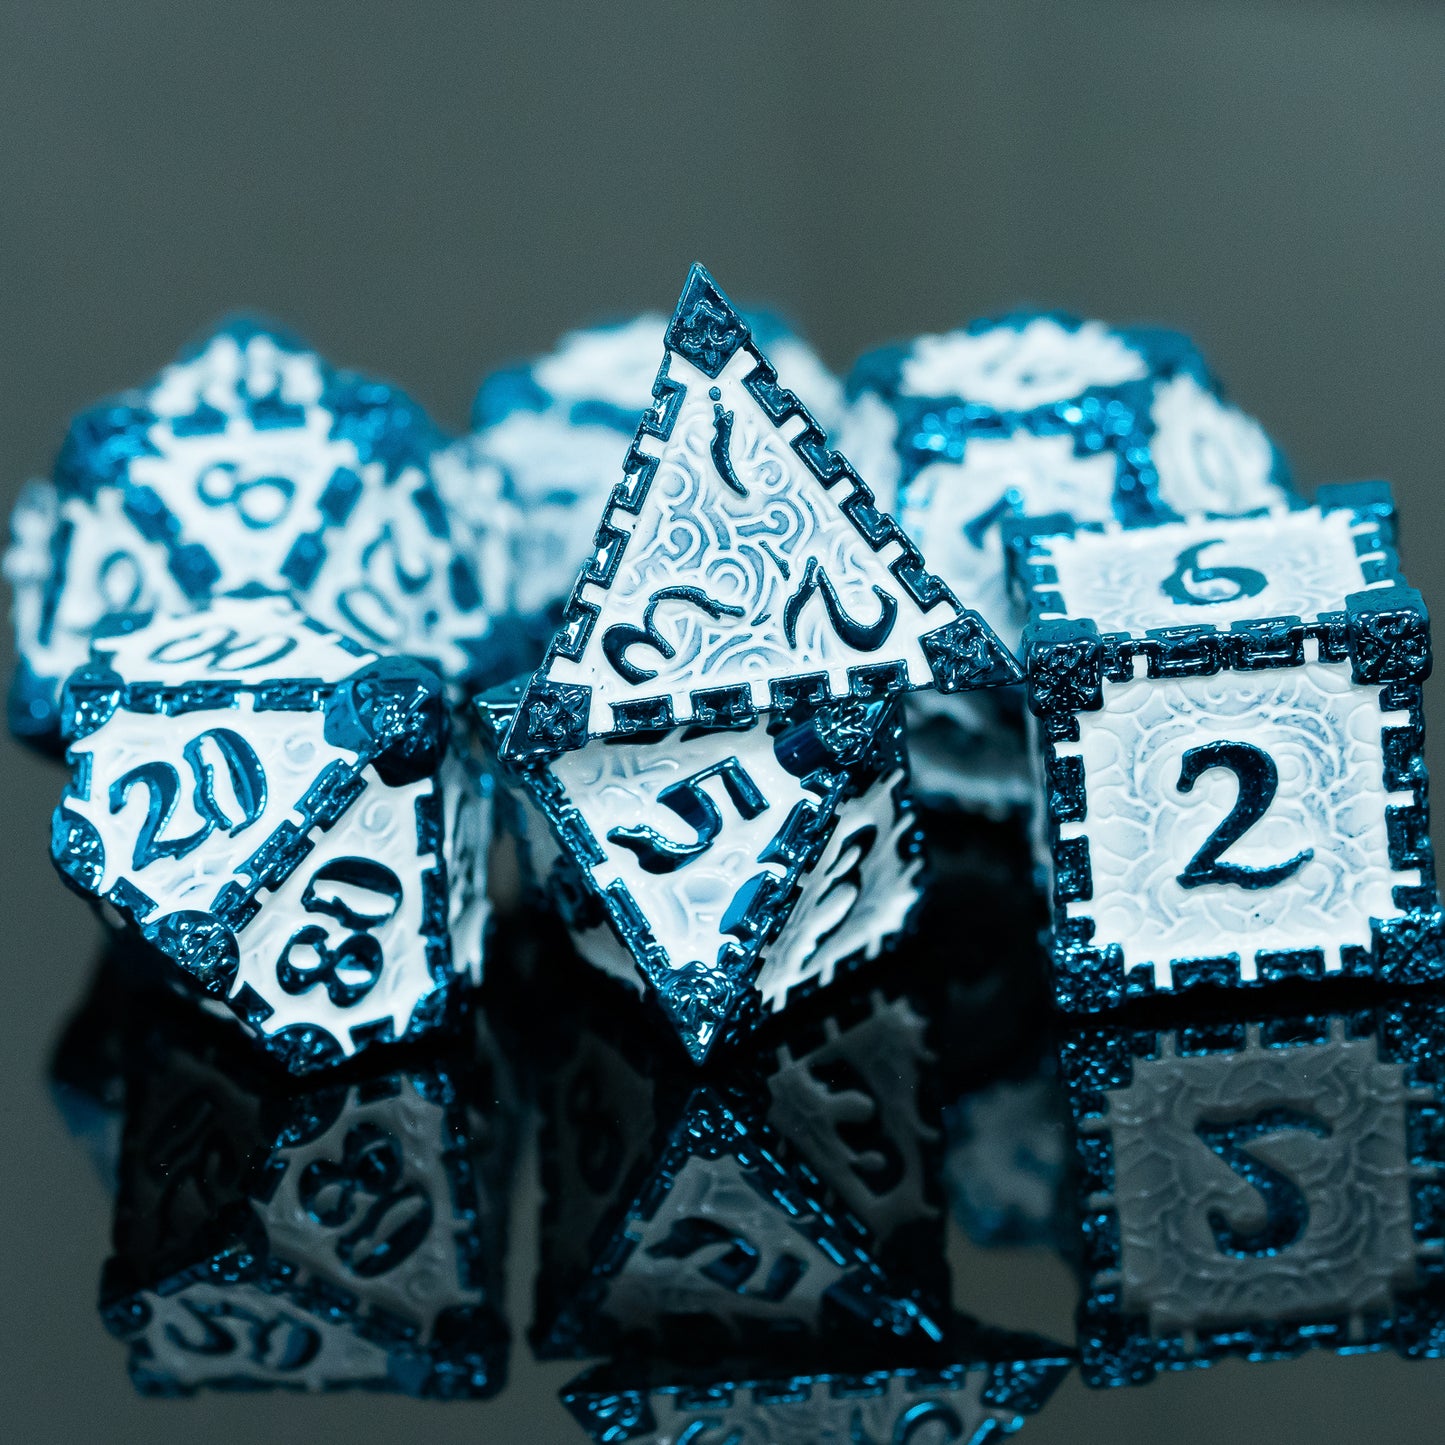 Metal Dice Set, 7 pieces, blue edges and numbers on white background, placed on reflective surface to show different angles 